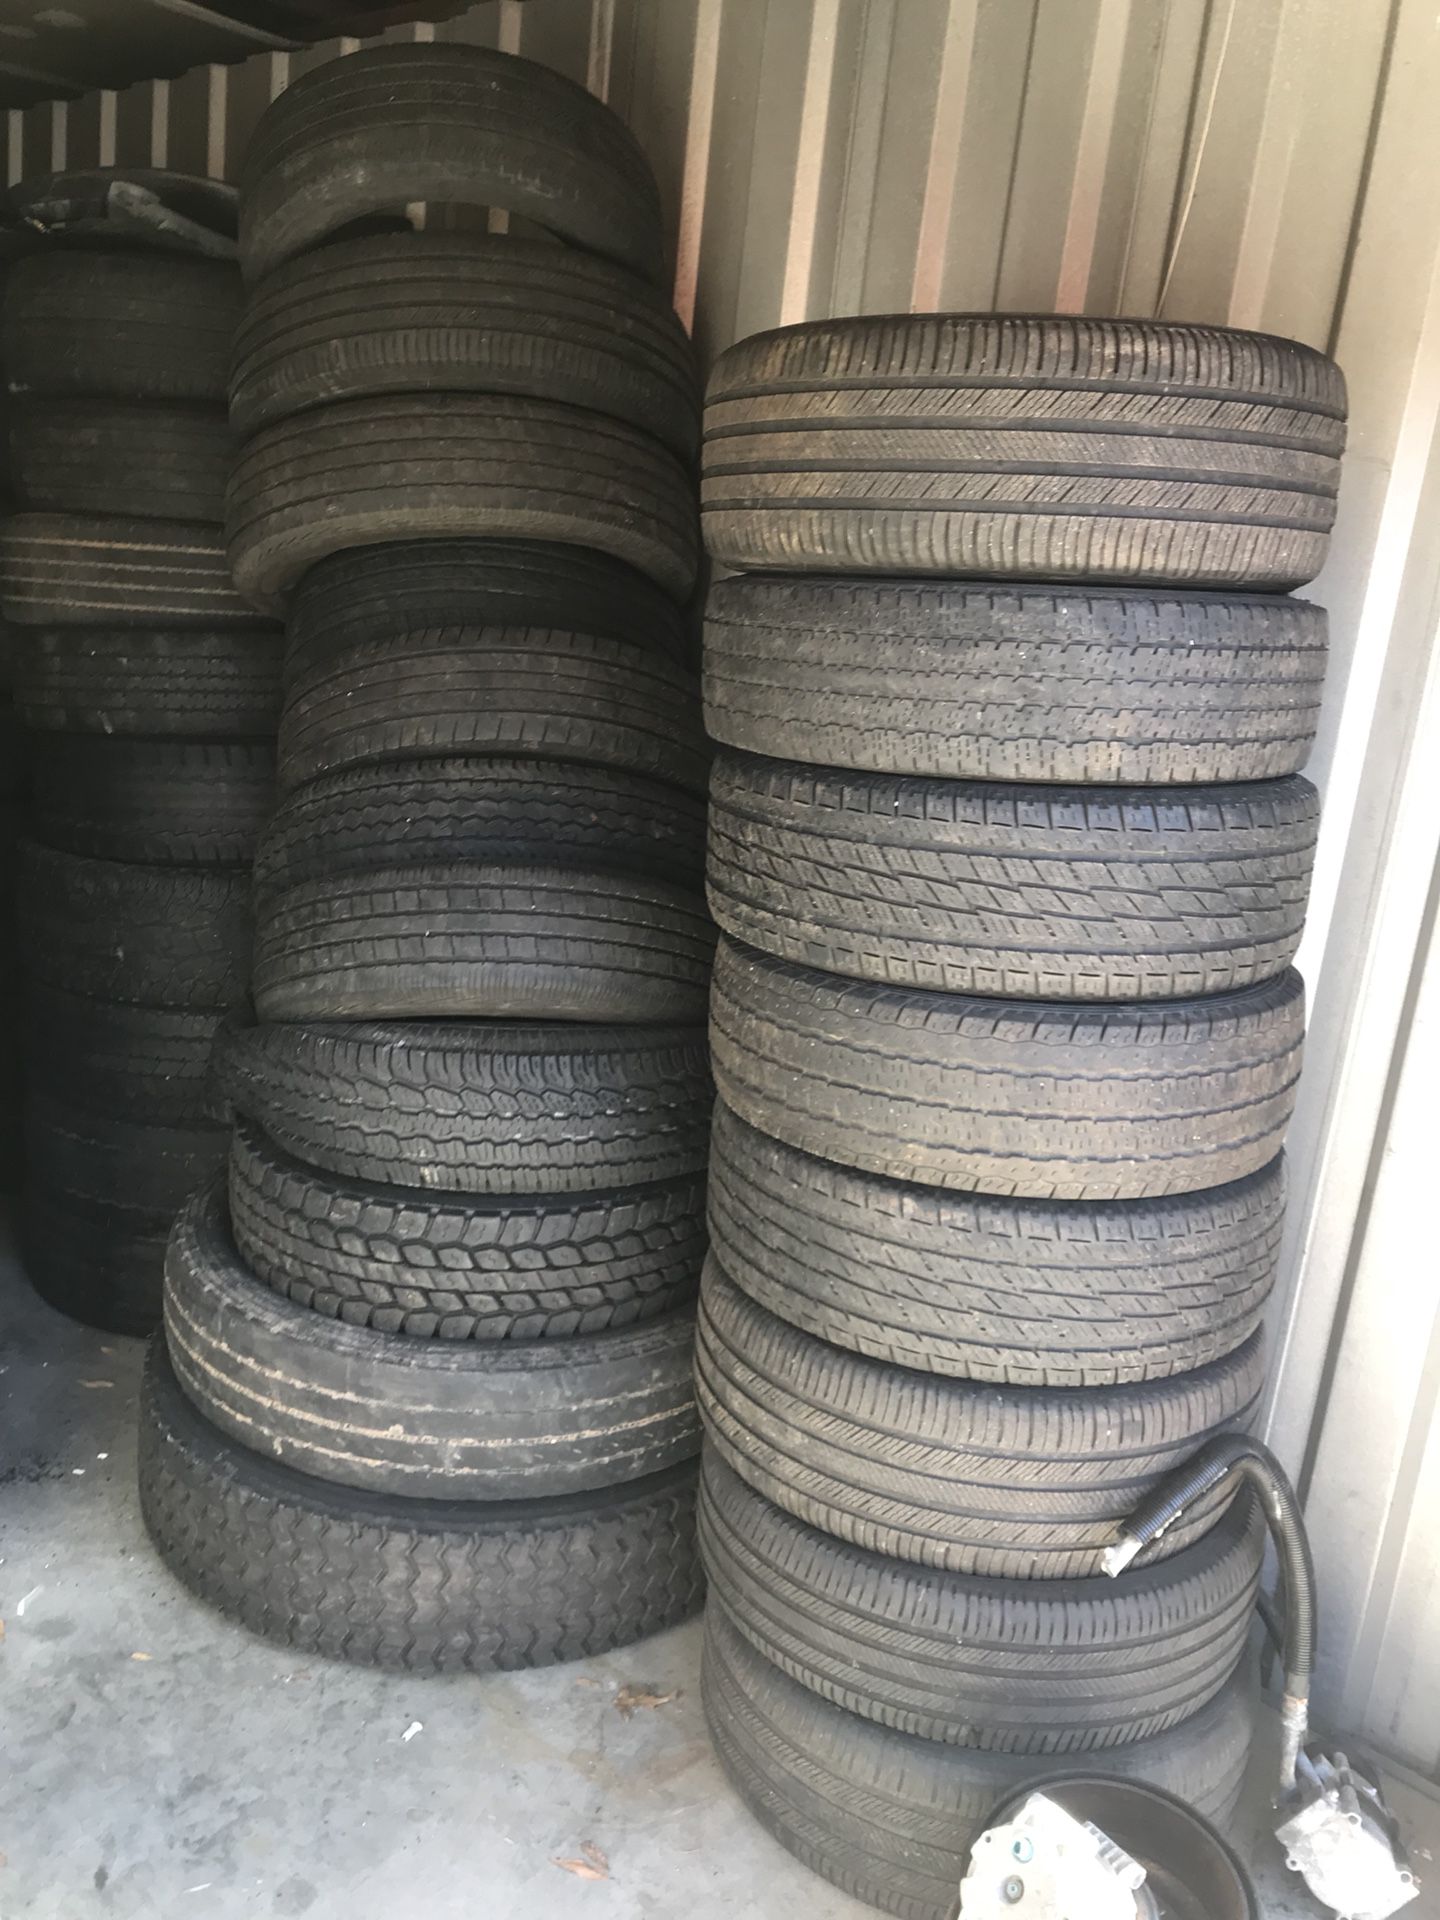 Pack (4) of Firestone tires 215/55/r17